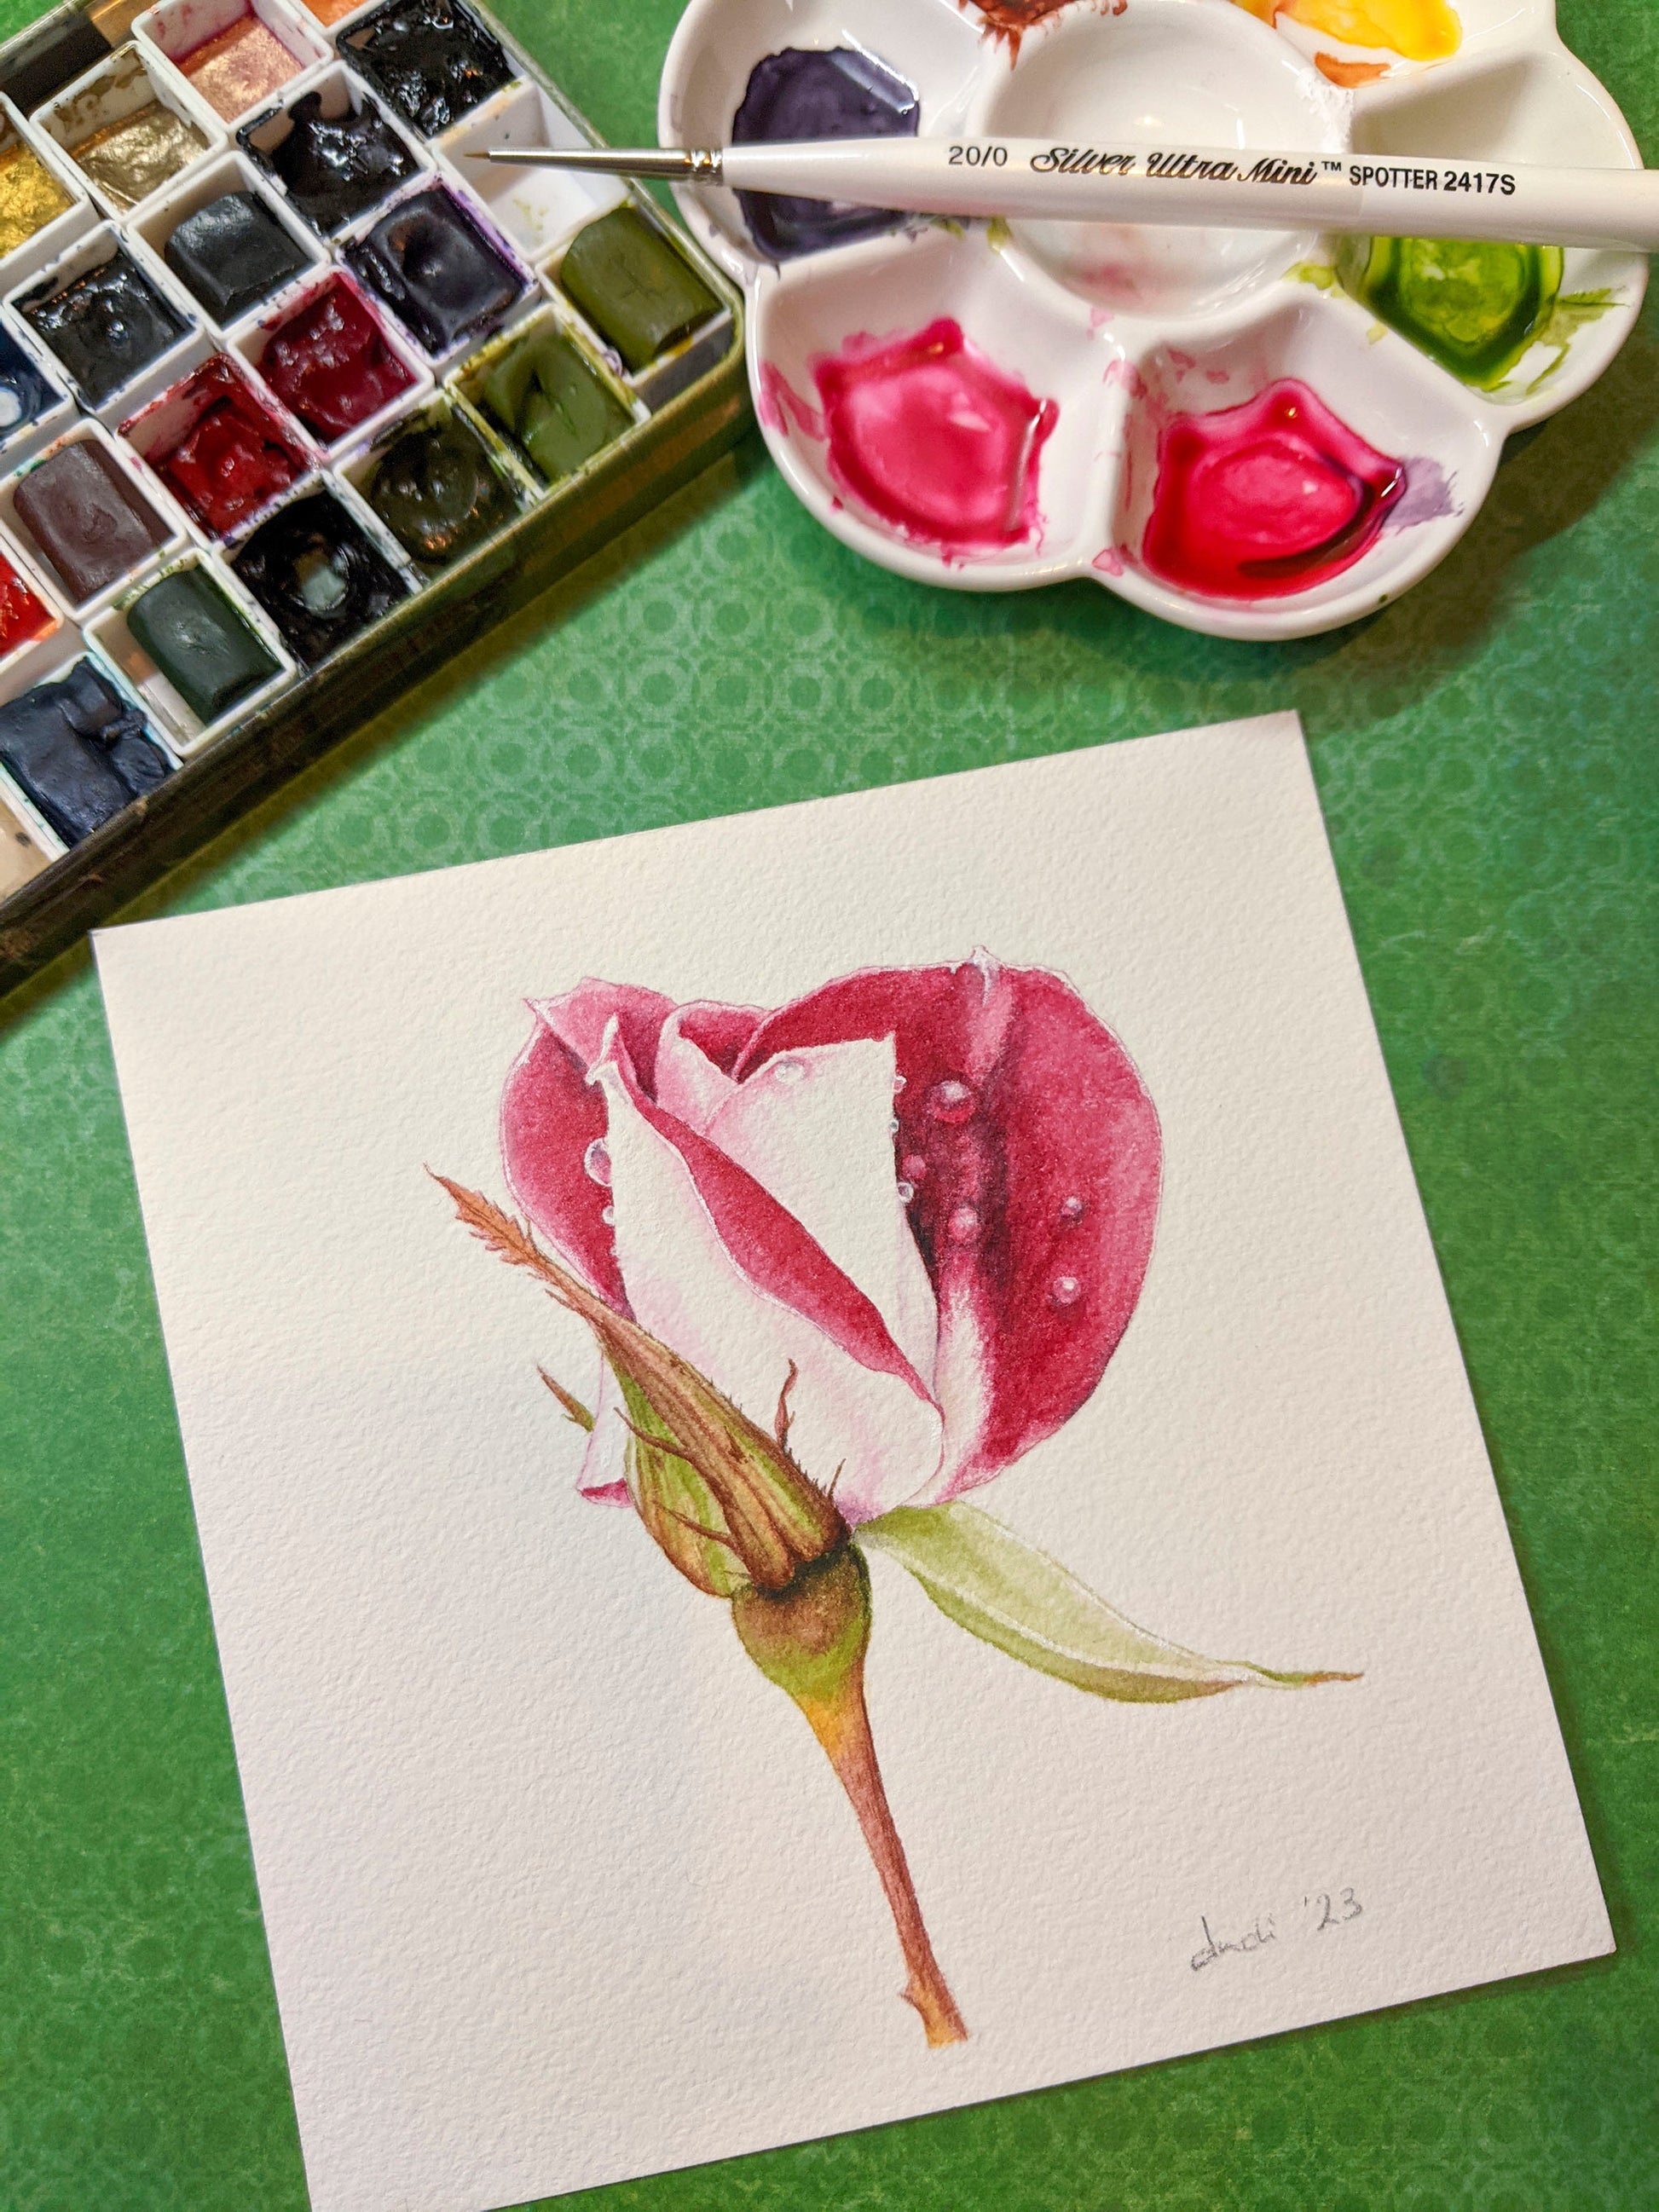 video of a watercolour painting of a red and white rose with art supplies